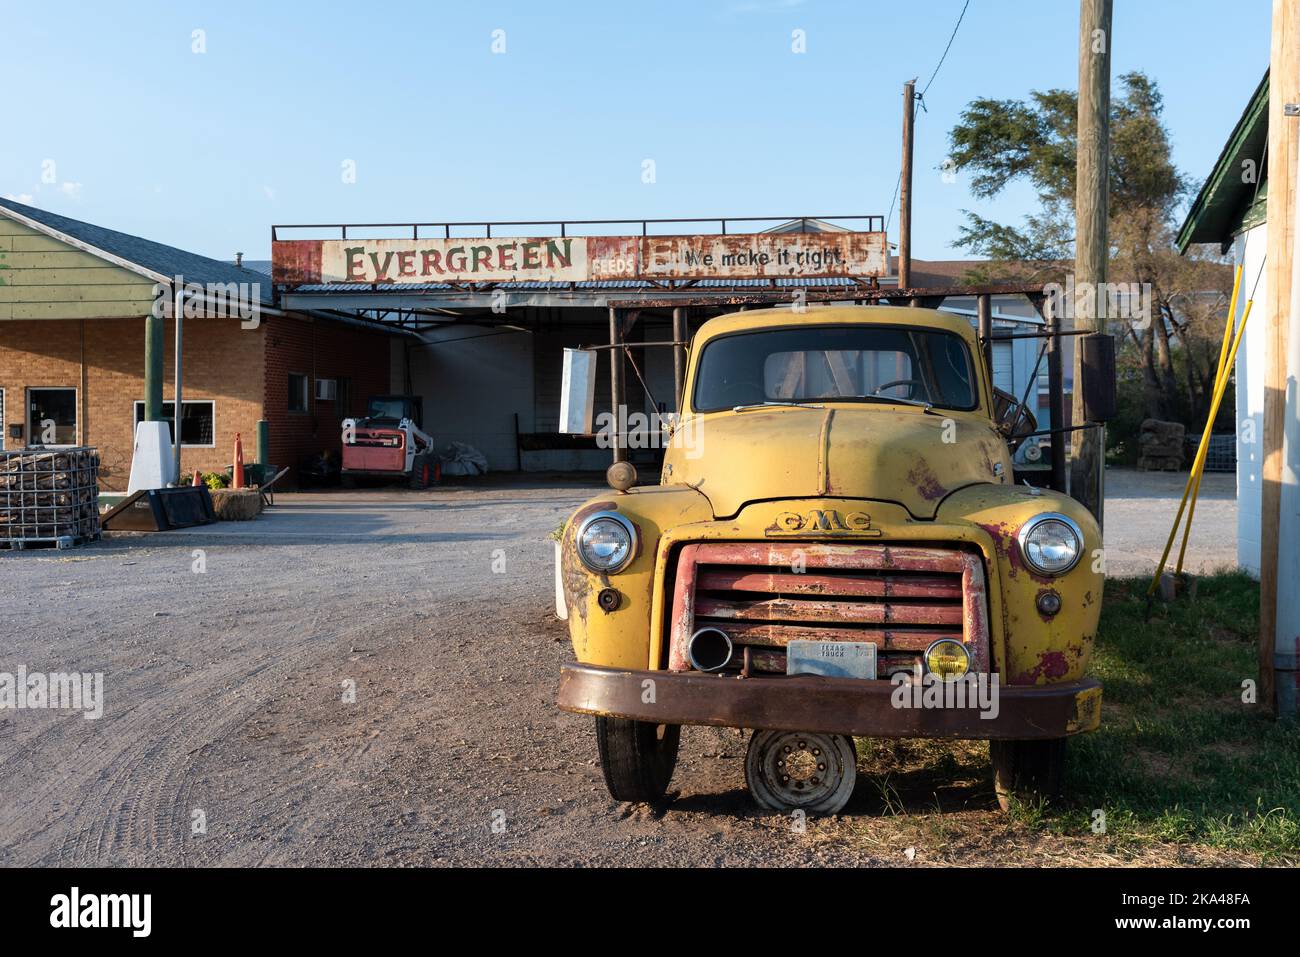 A vintage, yellow GMC truck parked in front of a business on Route 66, Shamrock, Texas, United States. Stock Photo